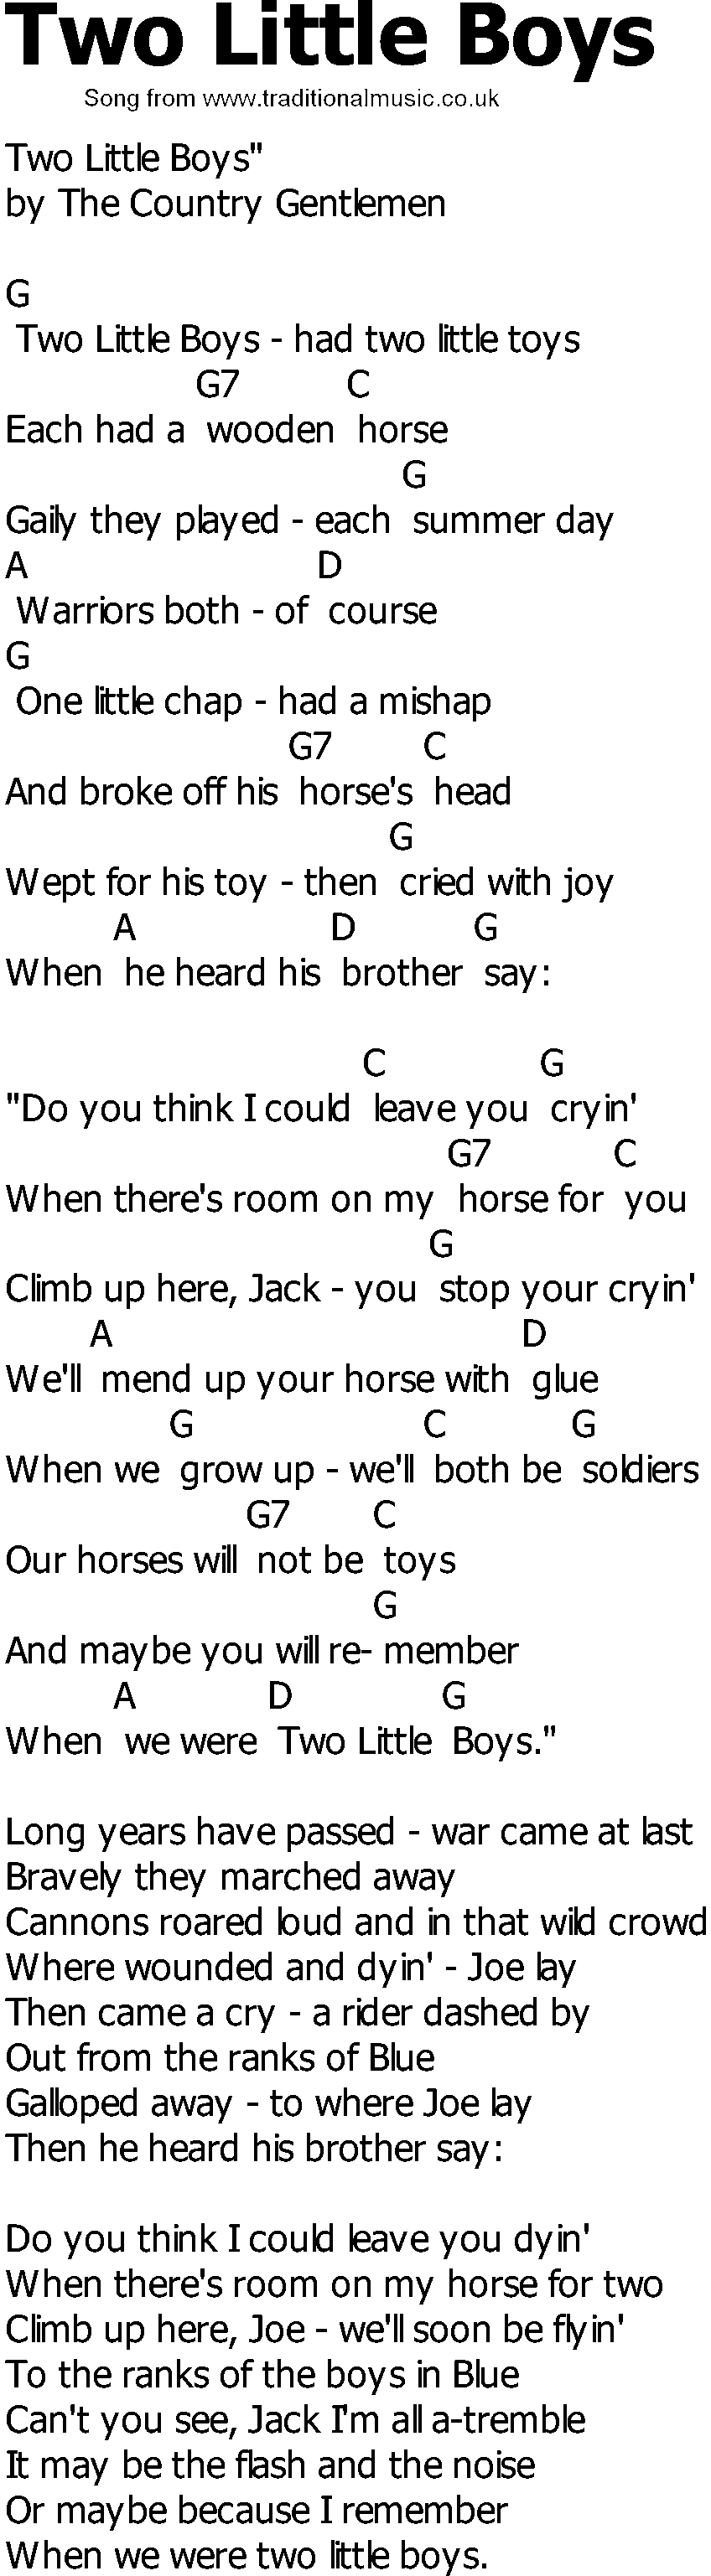 Old Country song lyrics with chords - Two Little Boys